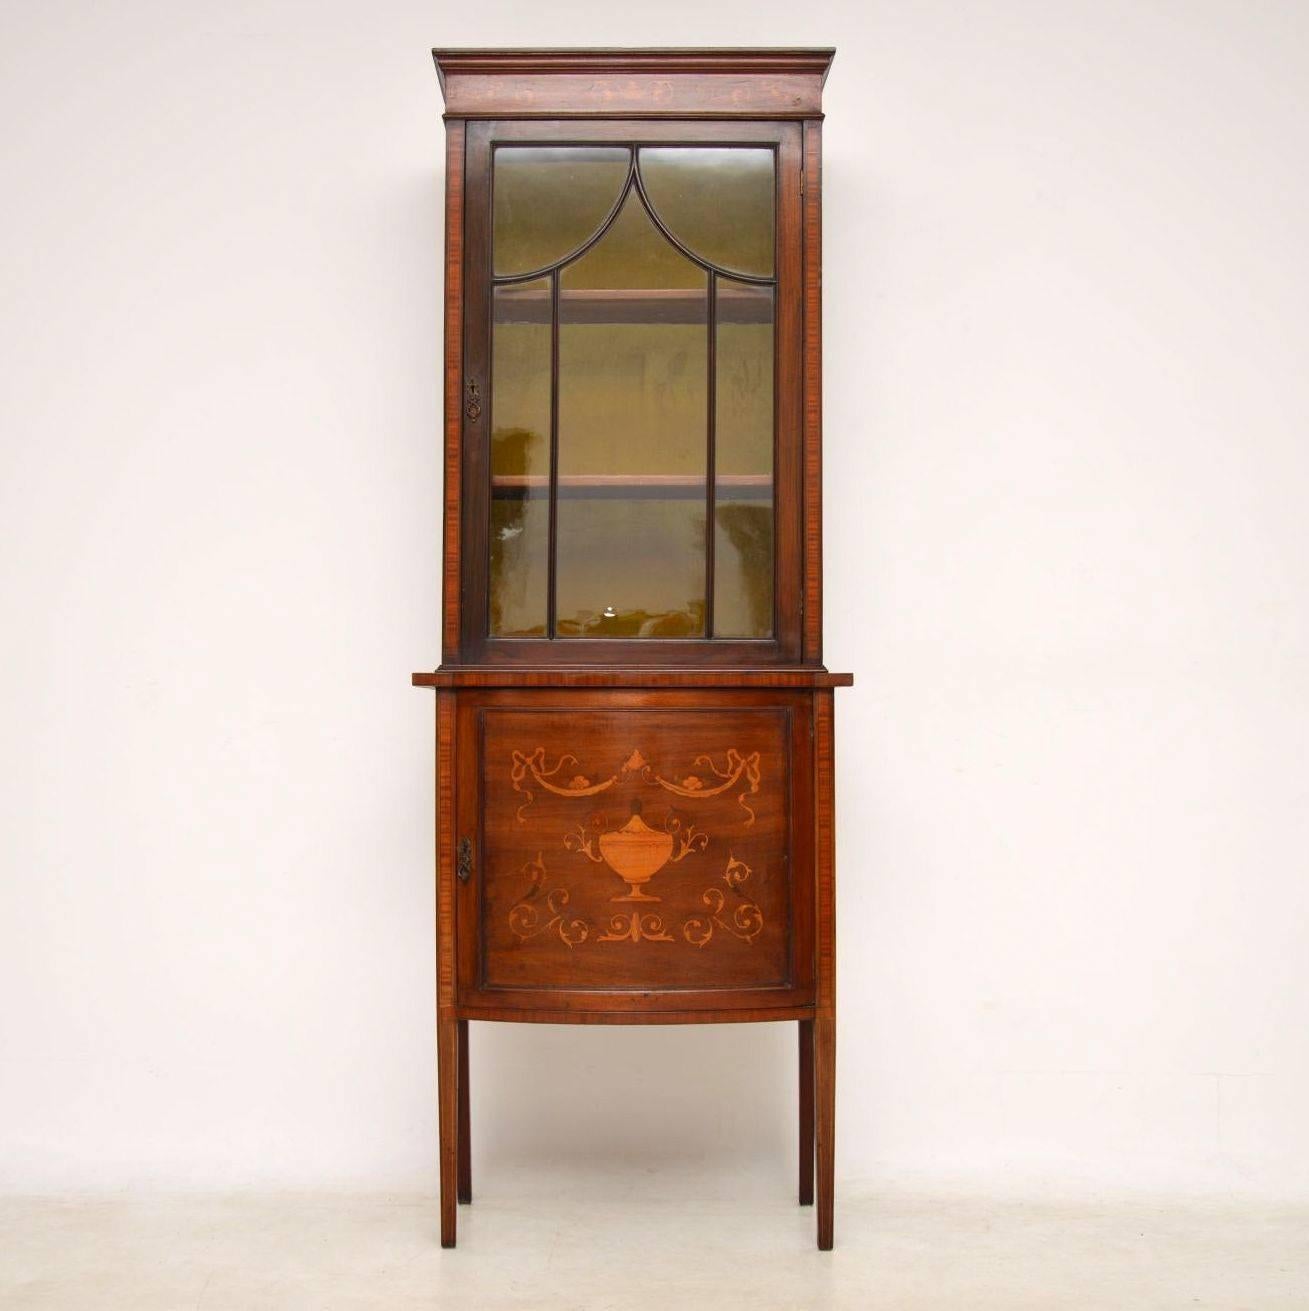 This slim antique mahogany and satinwood display cabinet dates circa 1890s period and is in good condition. The top half is a glazed cabinet lined inside. It sits on a bow fronted cupboard with beautiful inlays and stands on tall legs. Please